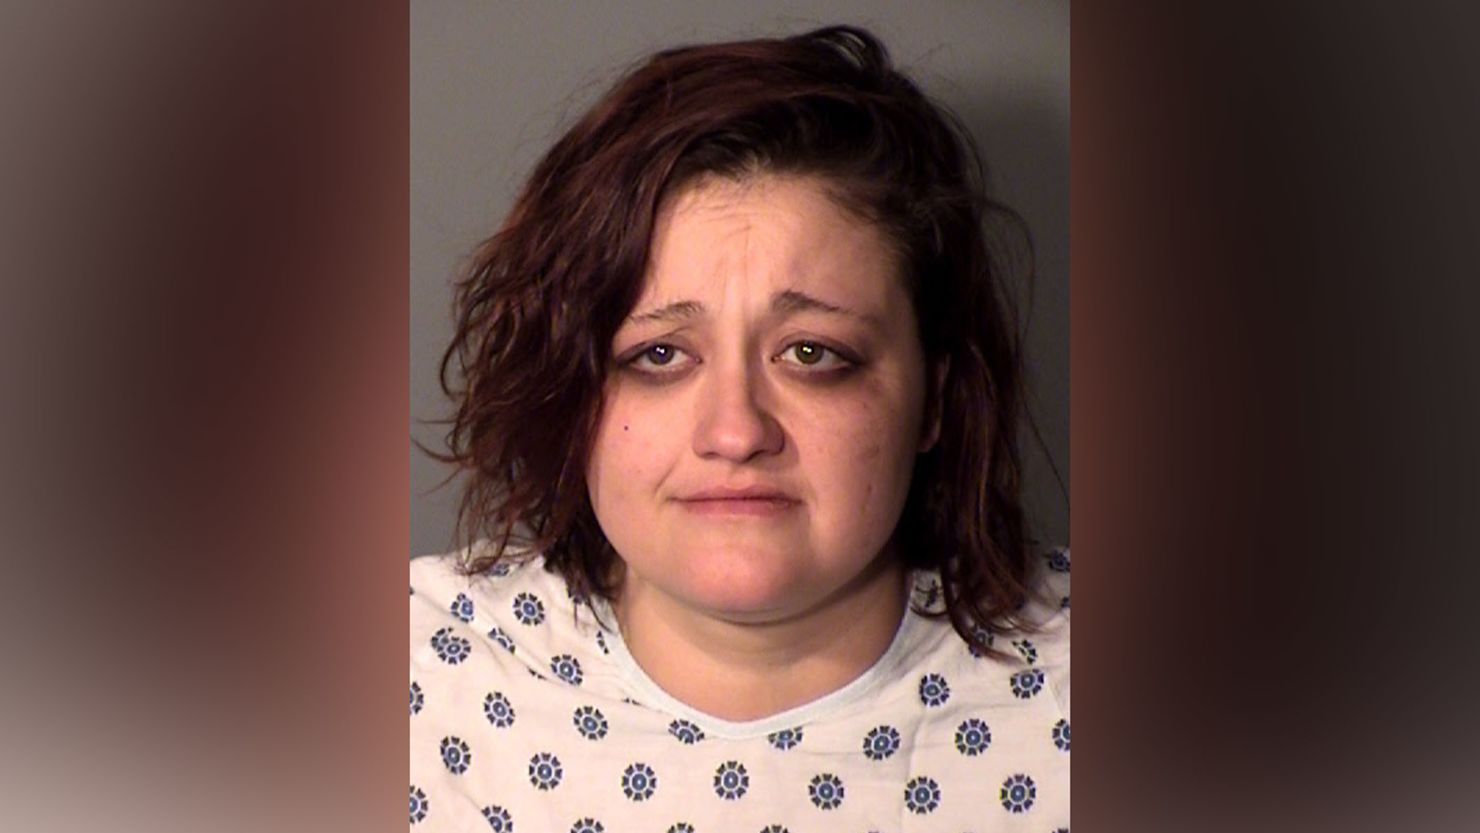 Tiffany Farrauto, 33, of New London, faces charges in the death of her 4-year-old son.